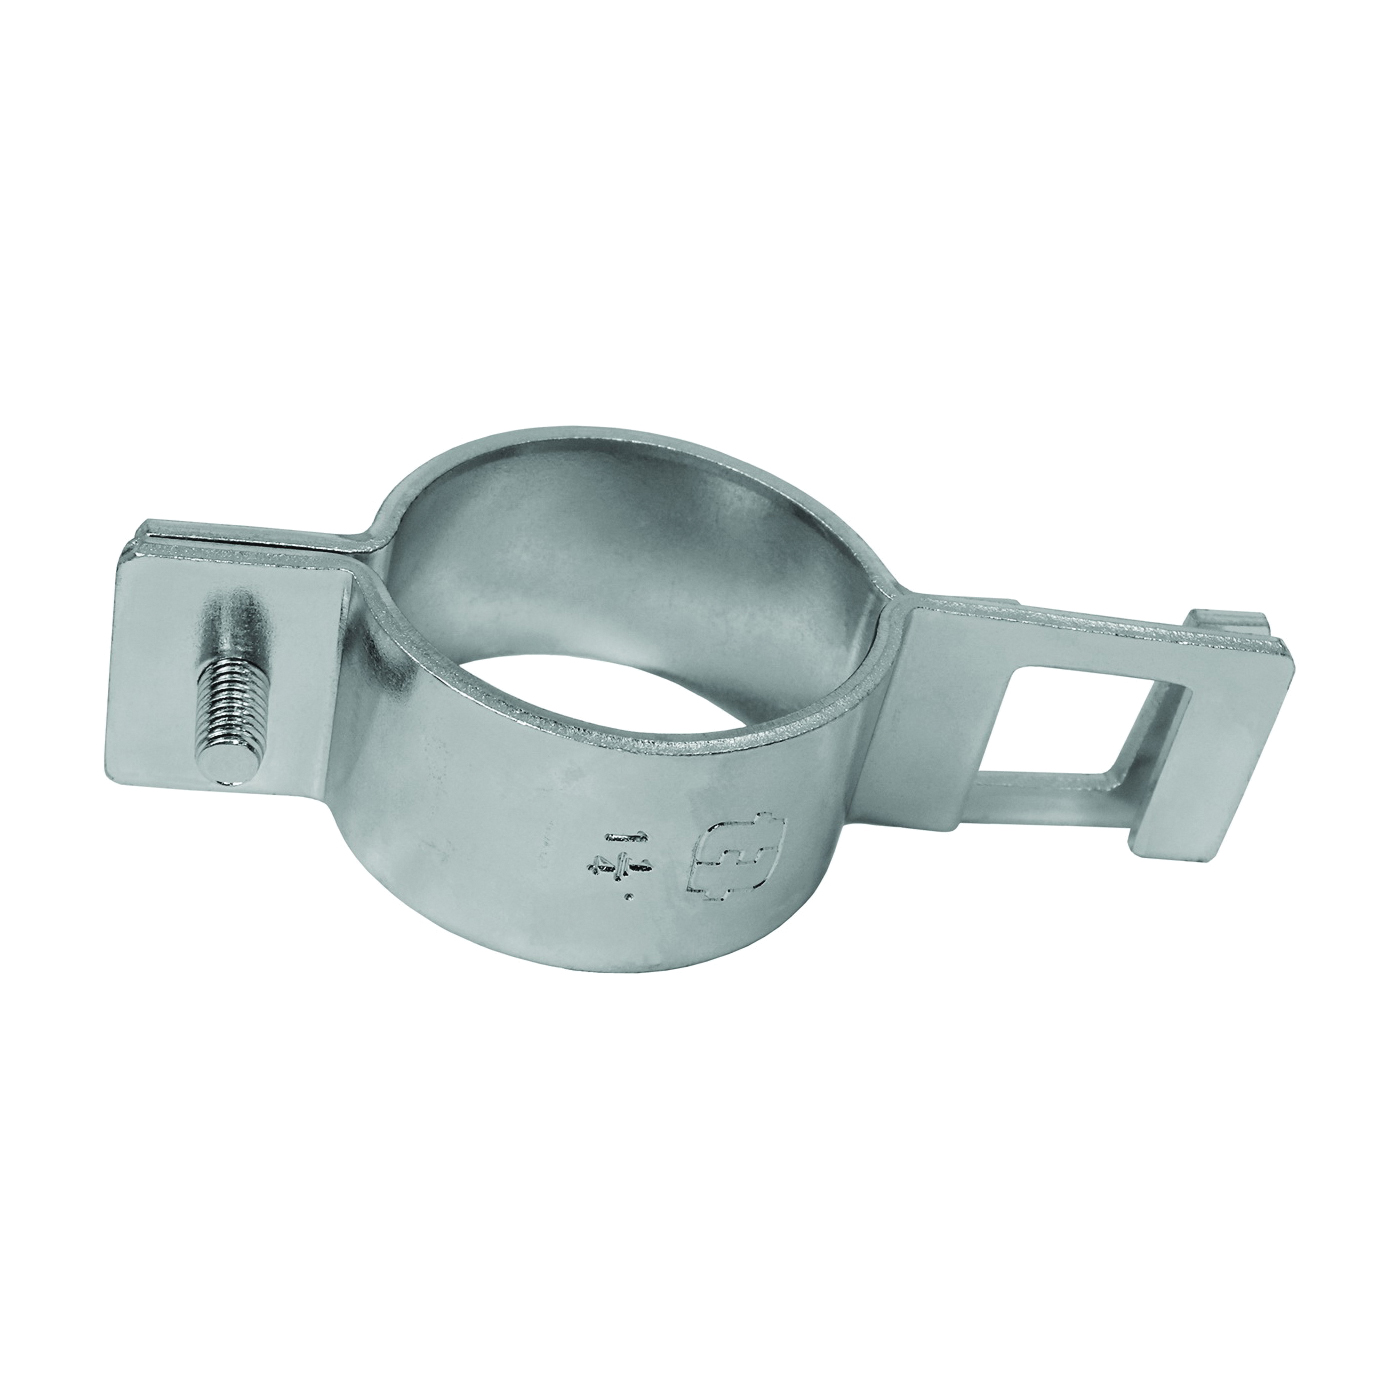 BQ11-114R Boom Clamp, Round, Steel, For: Clamp that Holds Sprayer Nozzle Bodies